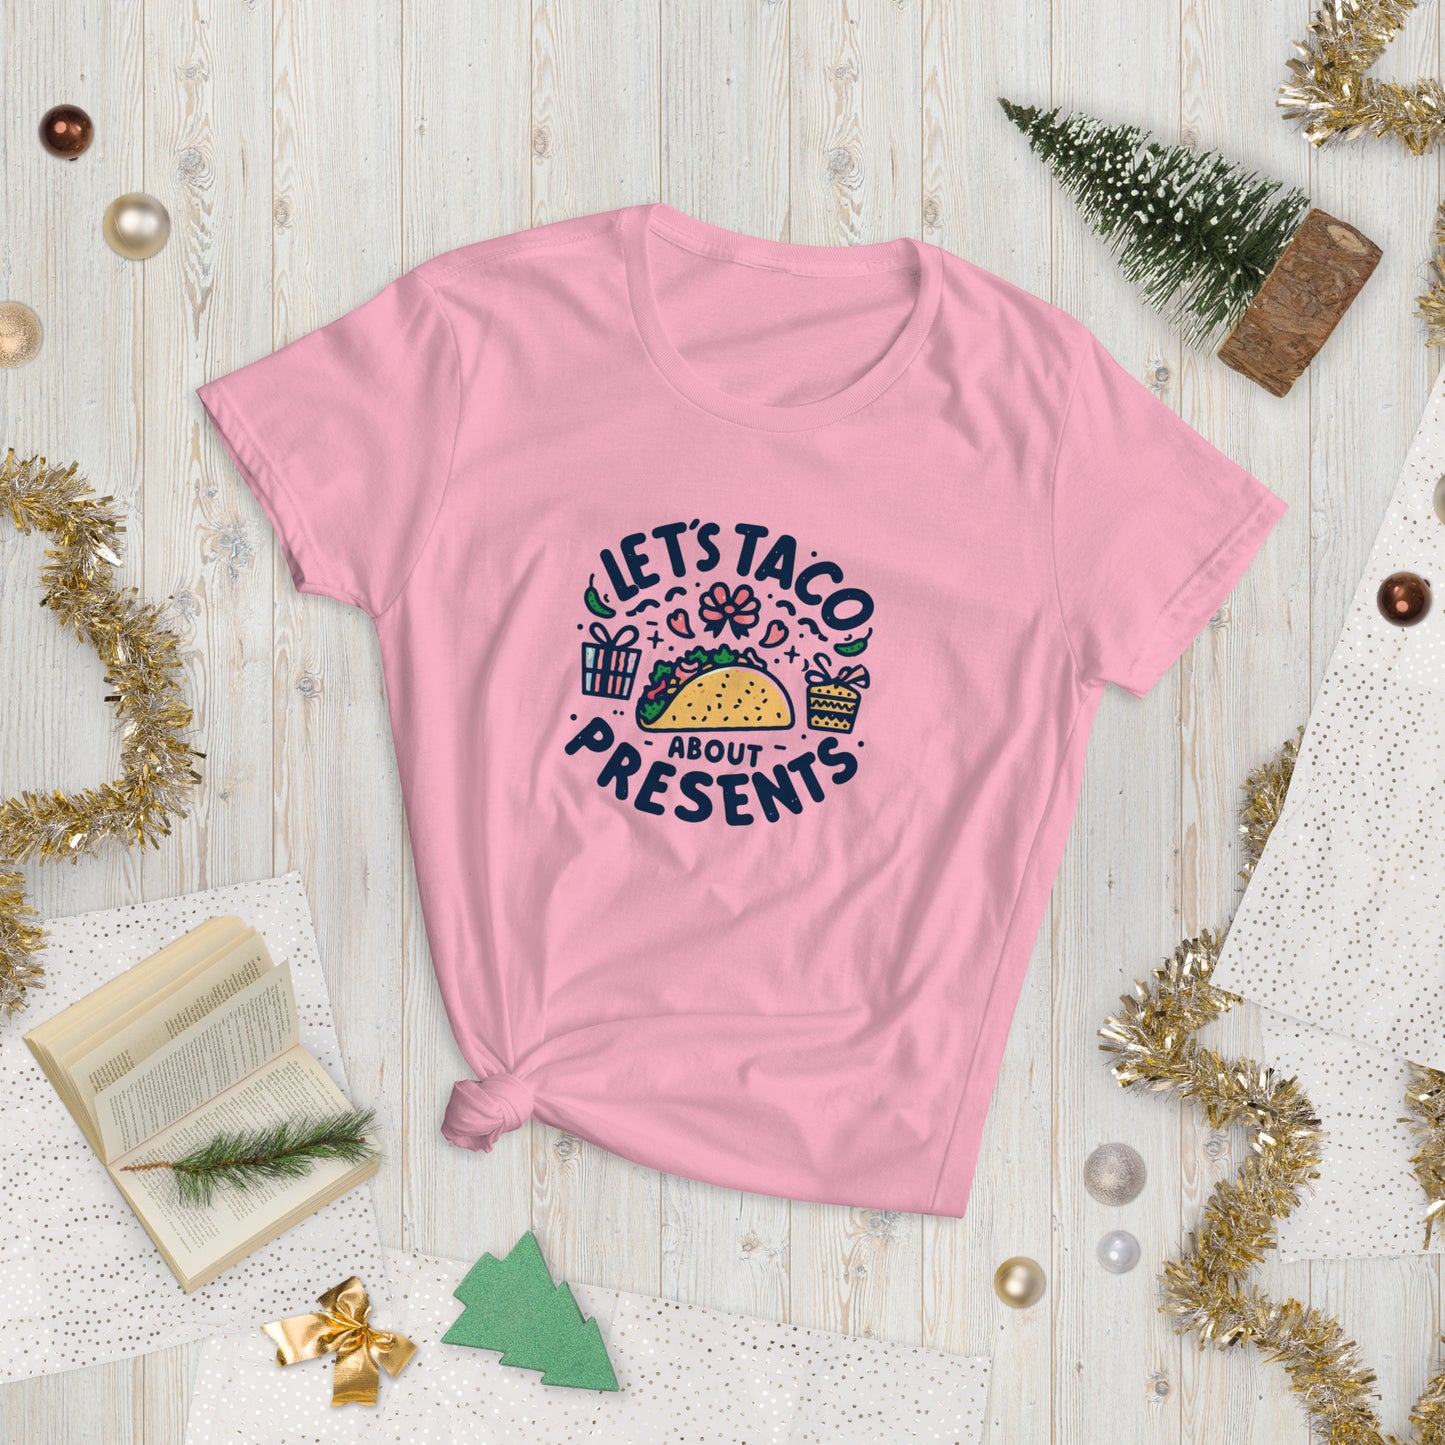 Let's Taco About Presents Women's Tee Shirt